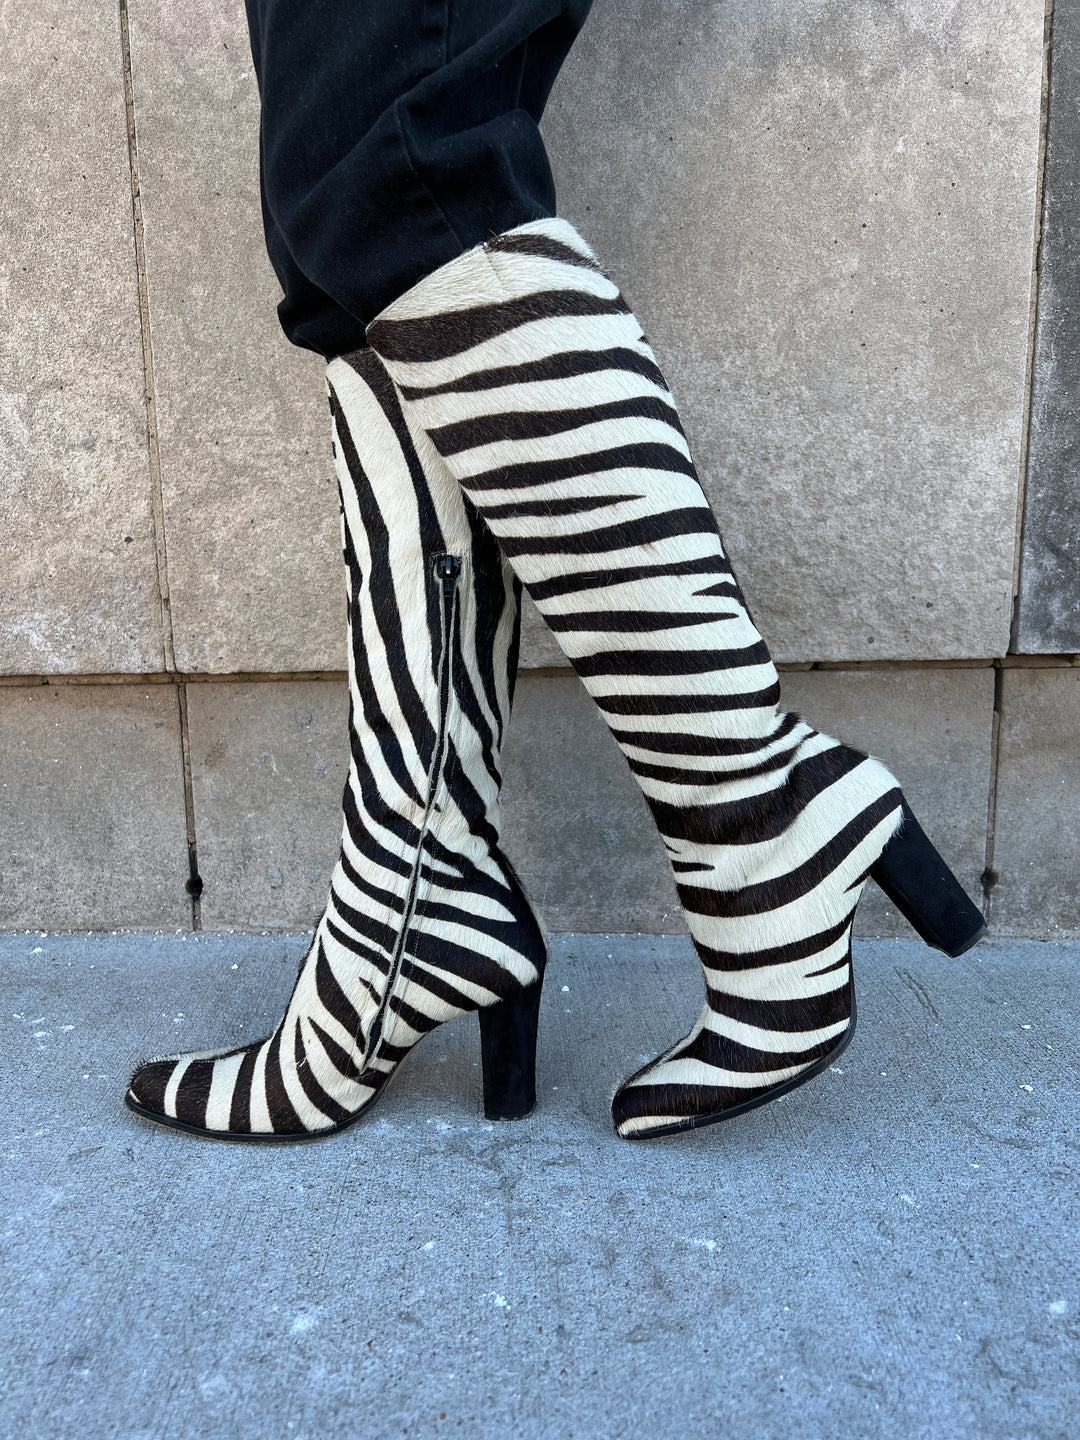 80s Zebra Print Cowhide Boots, Guess